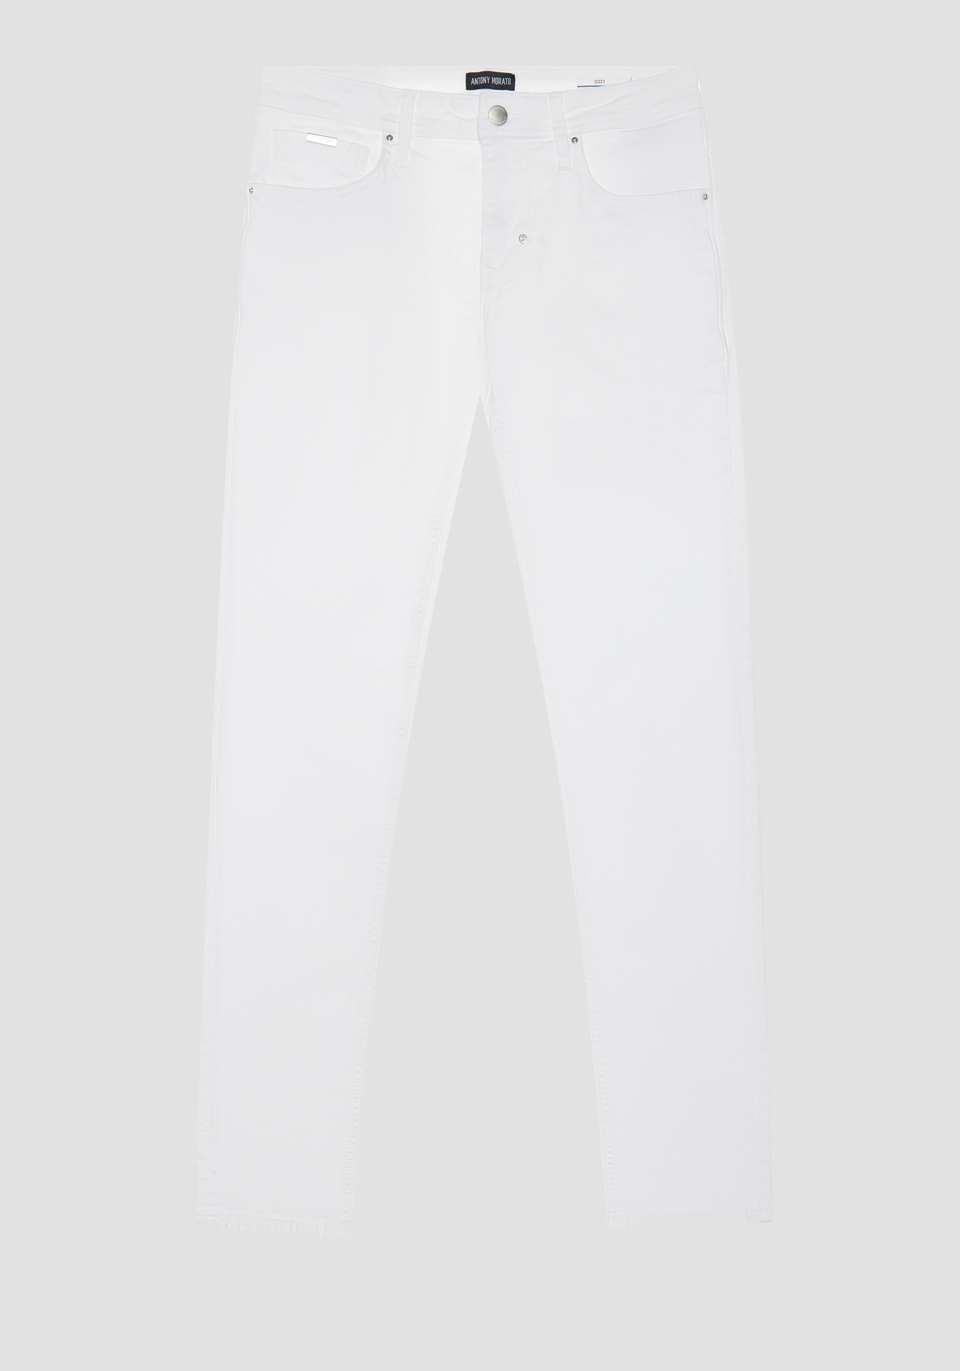 JEANS TAPERED FIT “OZZY” IN DENIM POWER STRETCH - Antony Morato Online Shop